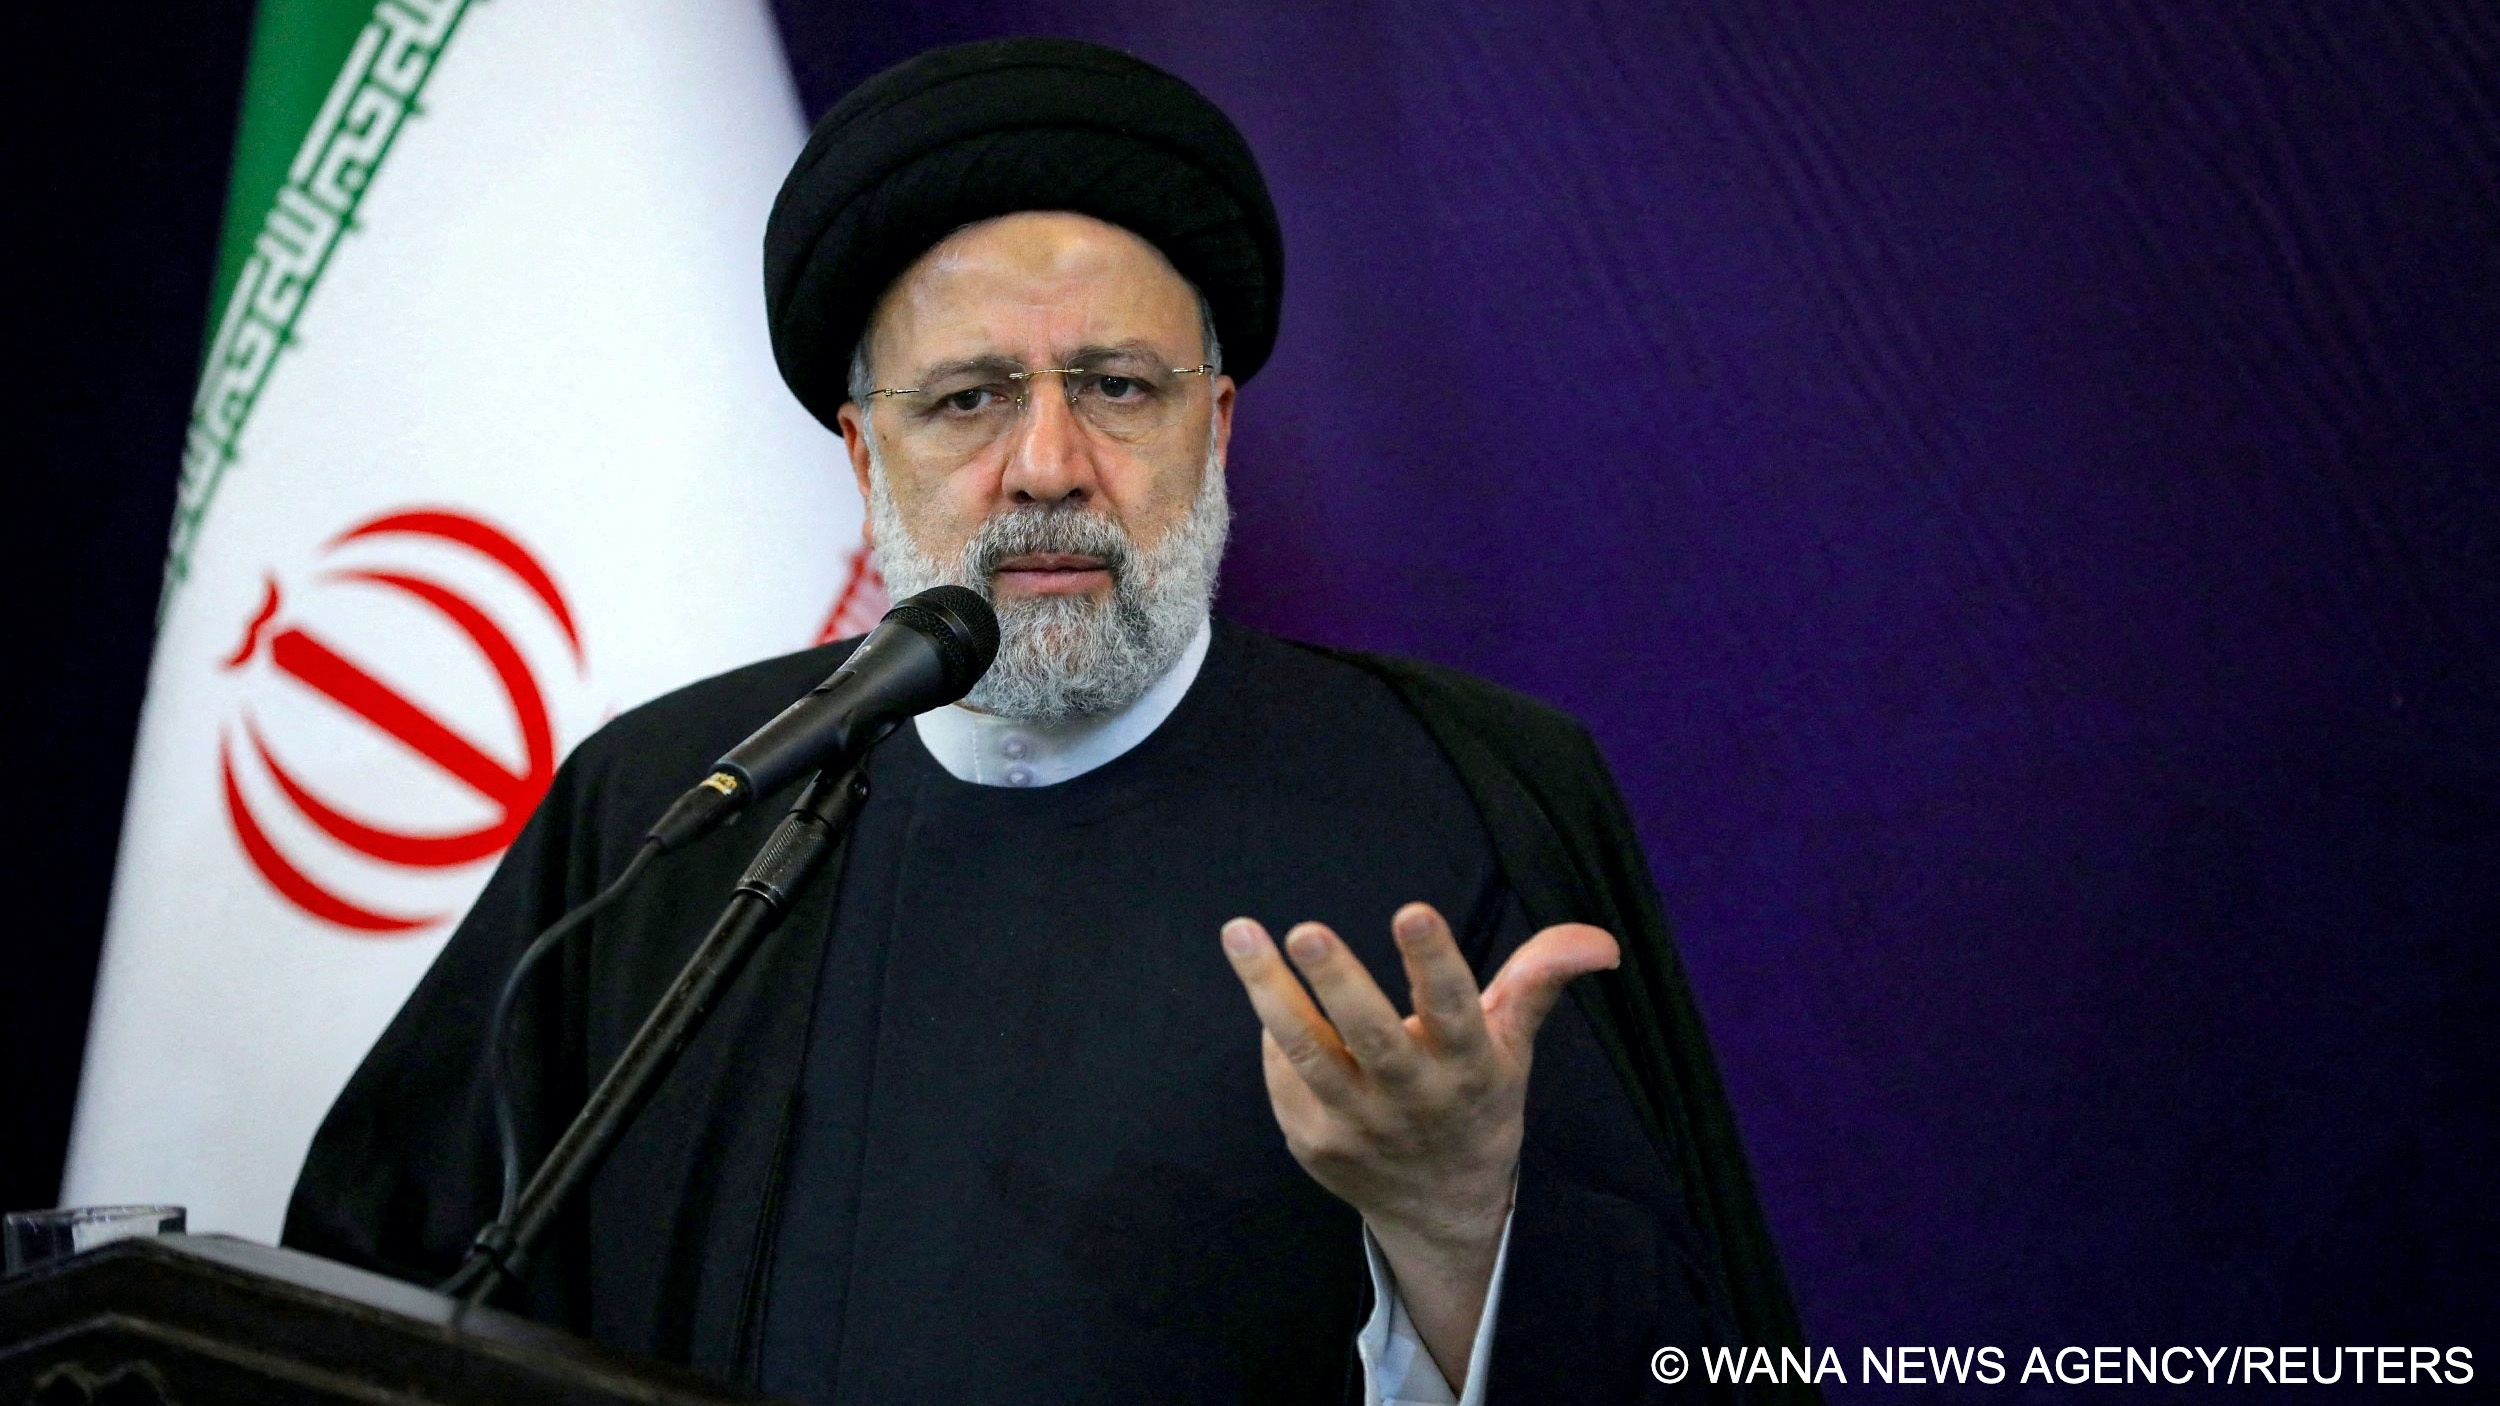 As a young prosecutor in Tehran, Ebrahim Raisi sat on a "death committee" overseeing the execution of hundreds of political prisoners in the Iranian capital, rights groups say.